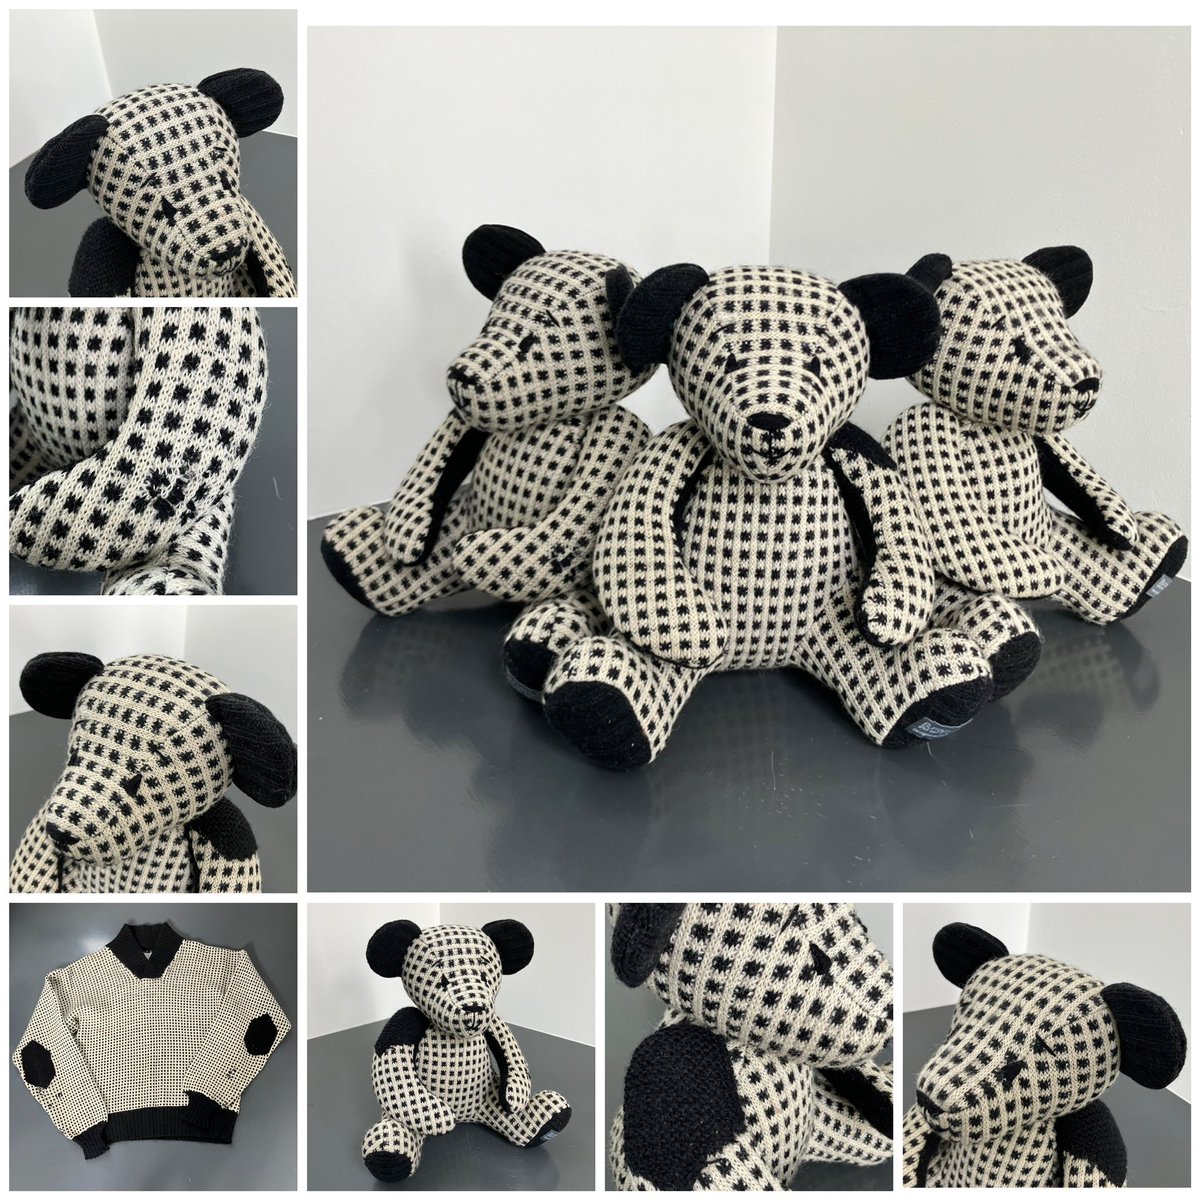 Burra Bear commissions:
a family of Burra Bears made from a favourite woolly jumper in memory of a dear husband, father and grandfather, much loved and very sadly missed
#burrabears #shetland